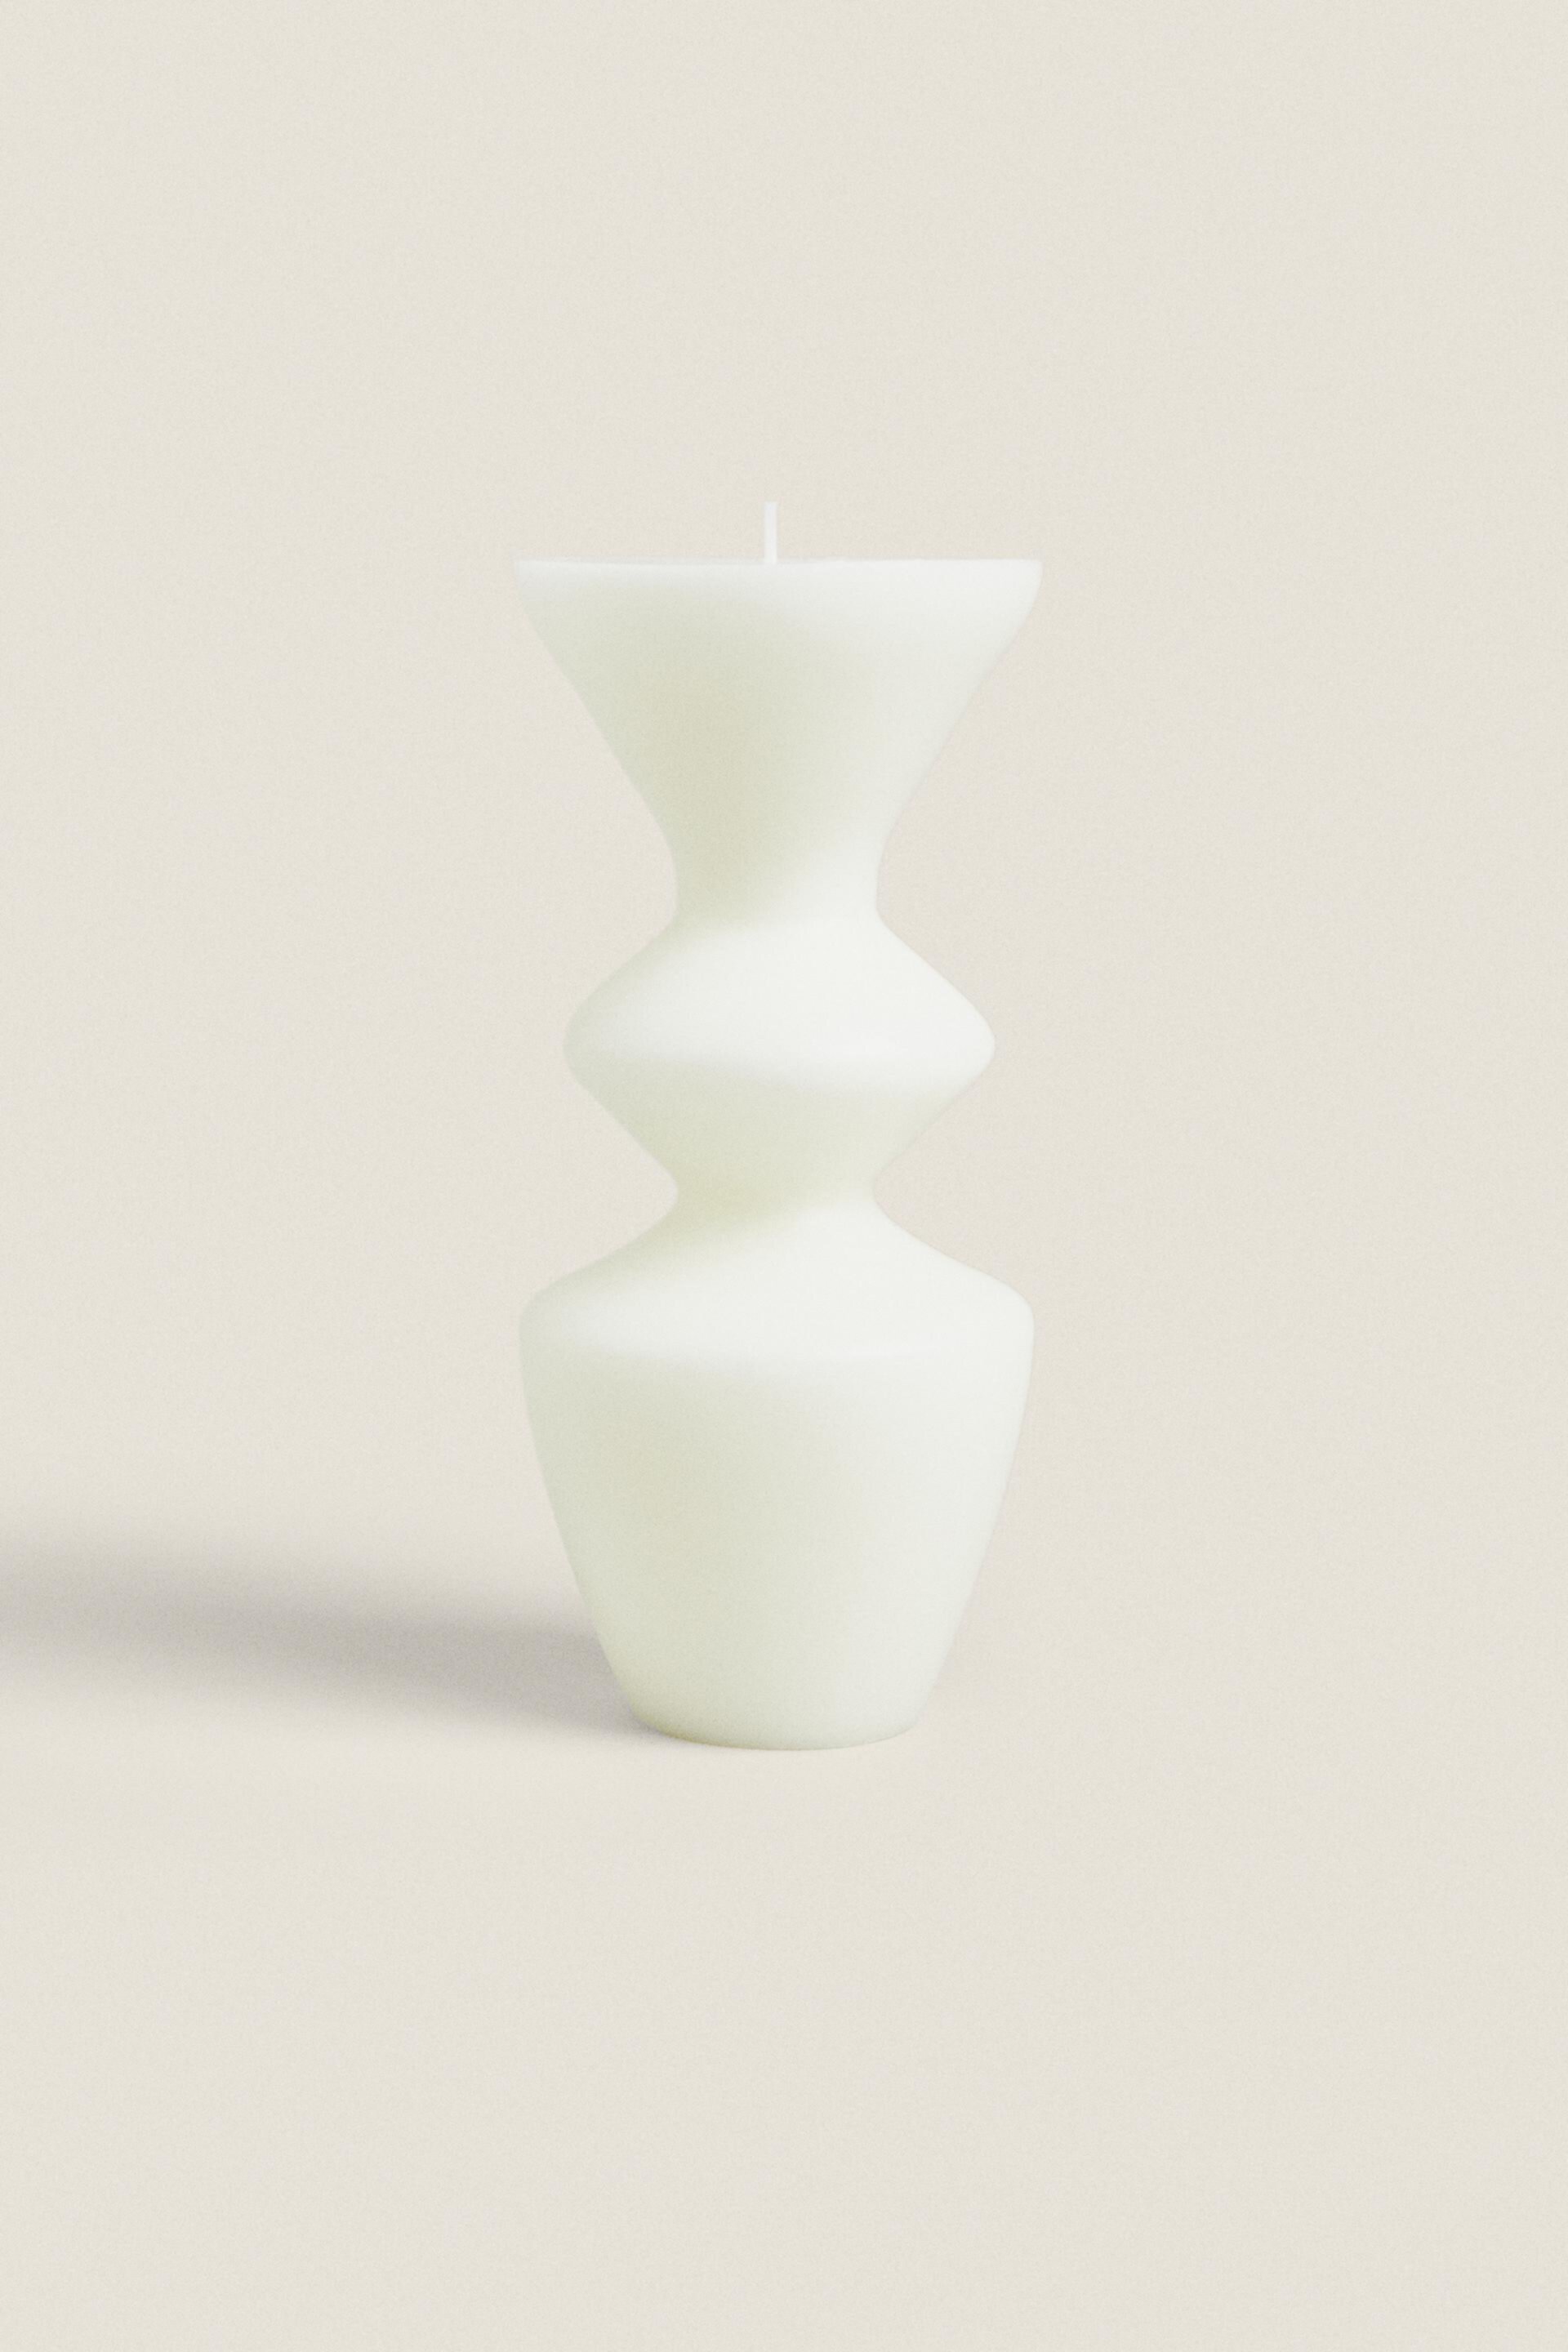 (610 G) FLORAL BEYOND SCENTED CANDLE CANDLESTICK ZARA